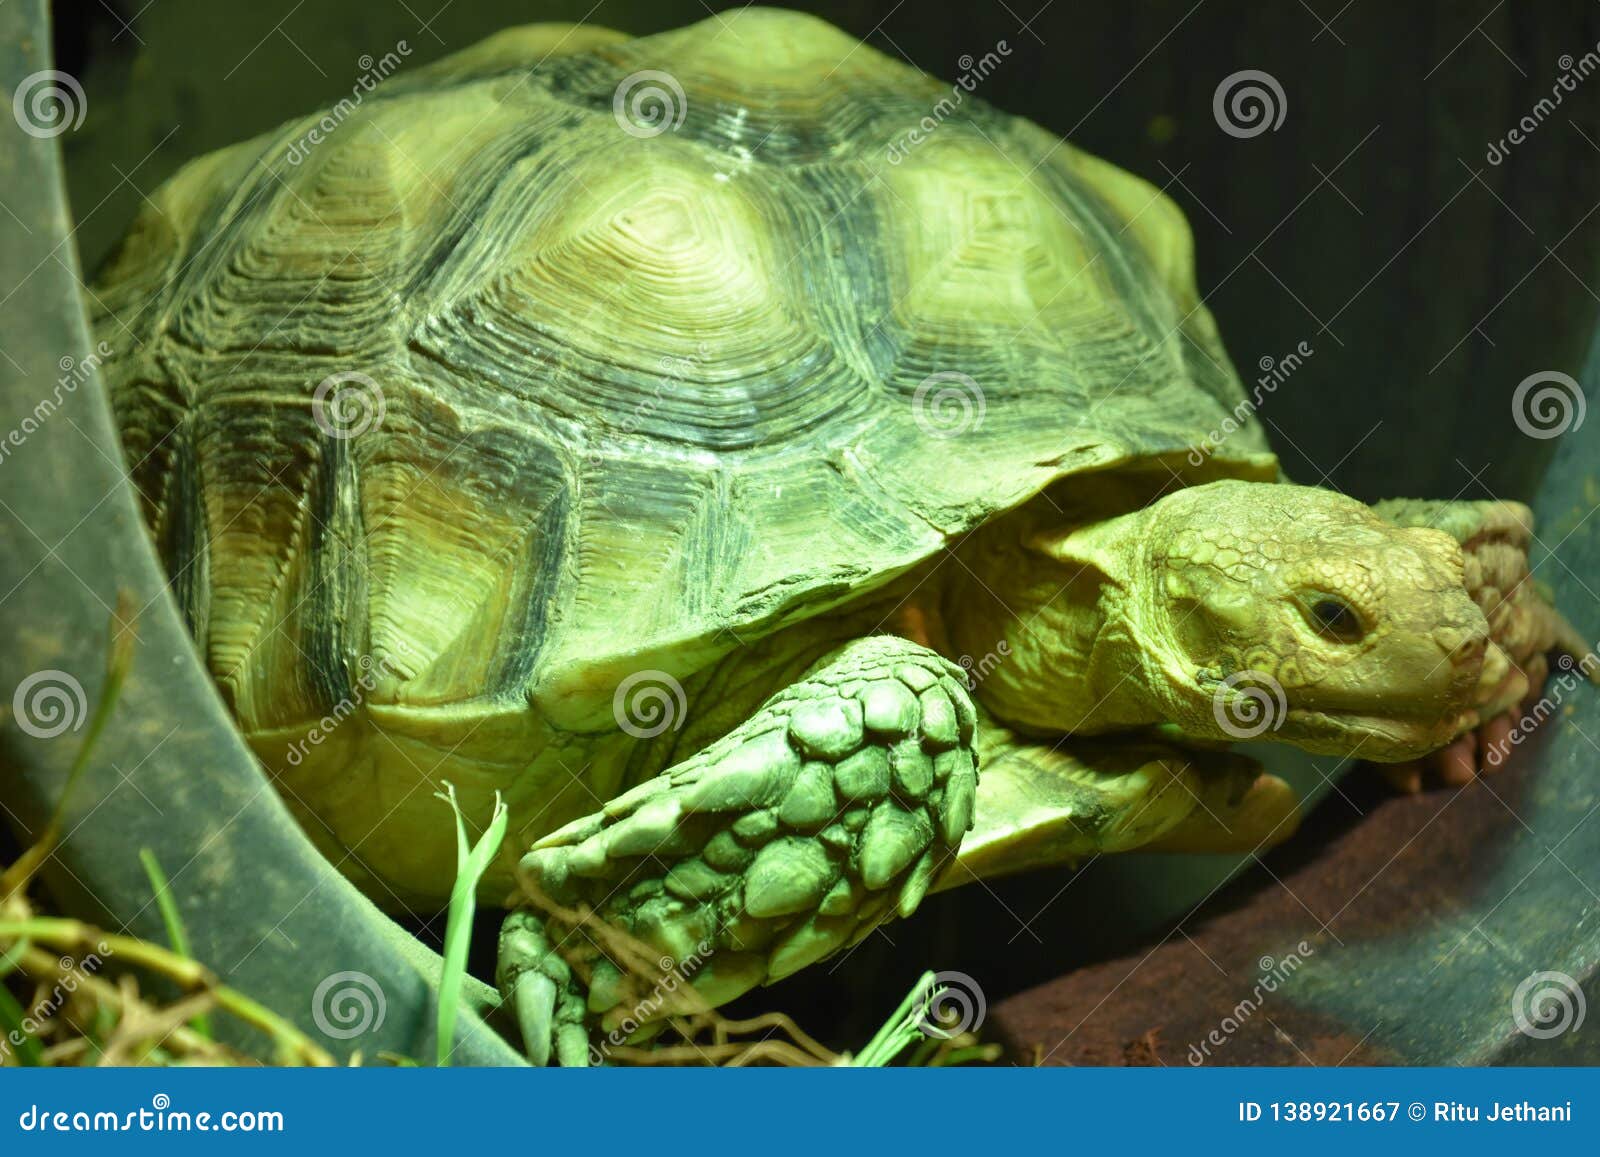 A Green Tortoise stock image. Image of ayora, ancient - 138921667